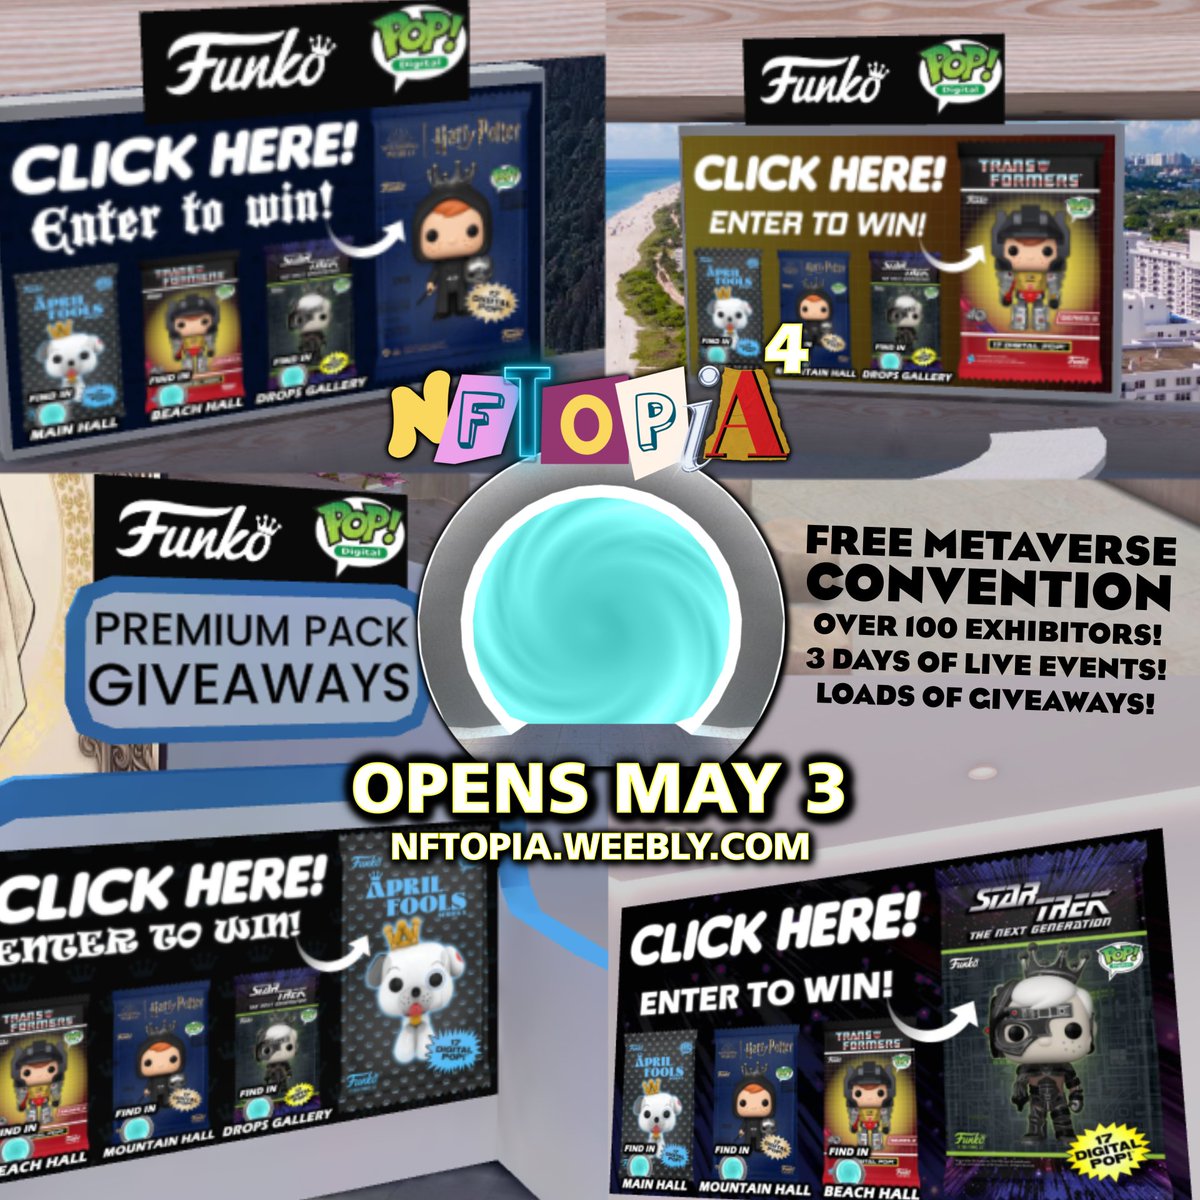 NFTOPIA 4 Metaverse Convention is MAY 3-5! 115 @WAX_io Exhibitors, LIVE Events & Galaxy of GIVEAWAYS! PRIZES include #Funko PREMIUM PACKs from #HarryPotter #Transformers #AprilFools #StarTrekTNG! ENTER AT GIVEAWAY BOOTHS inside @thenftopia Online Event at…